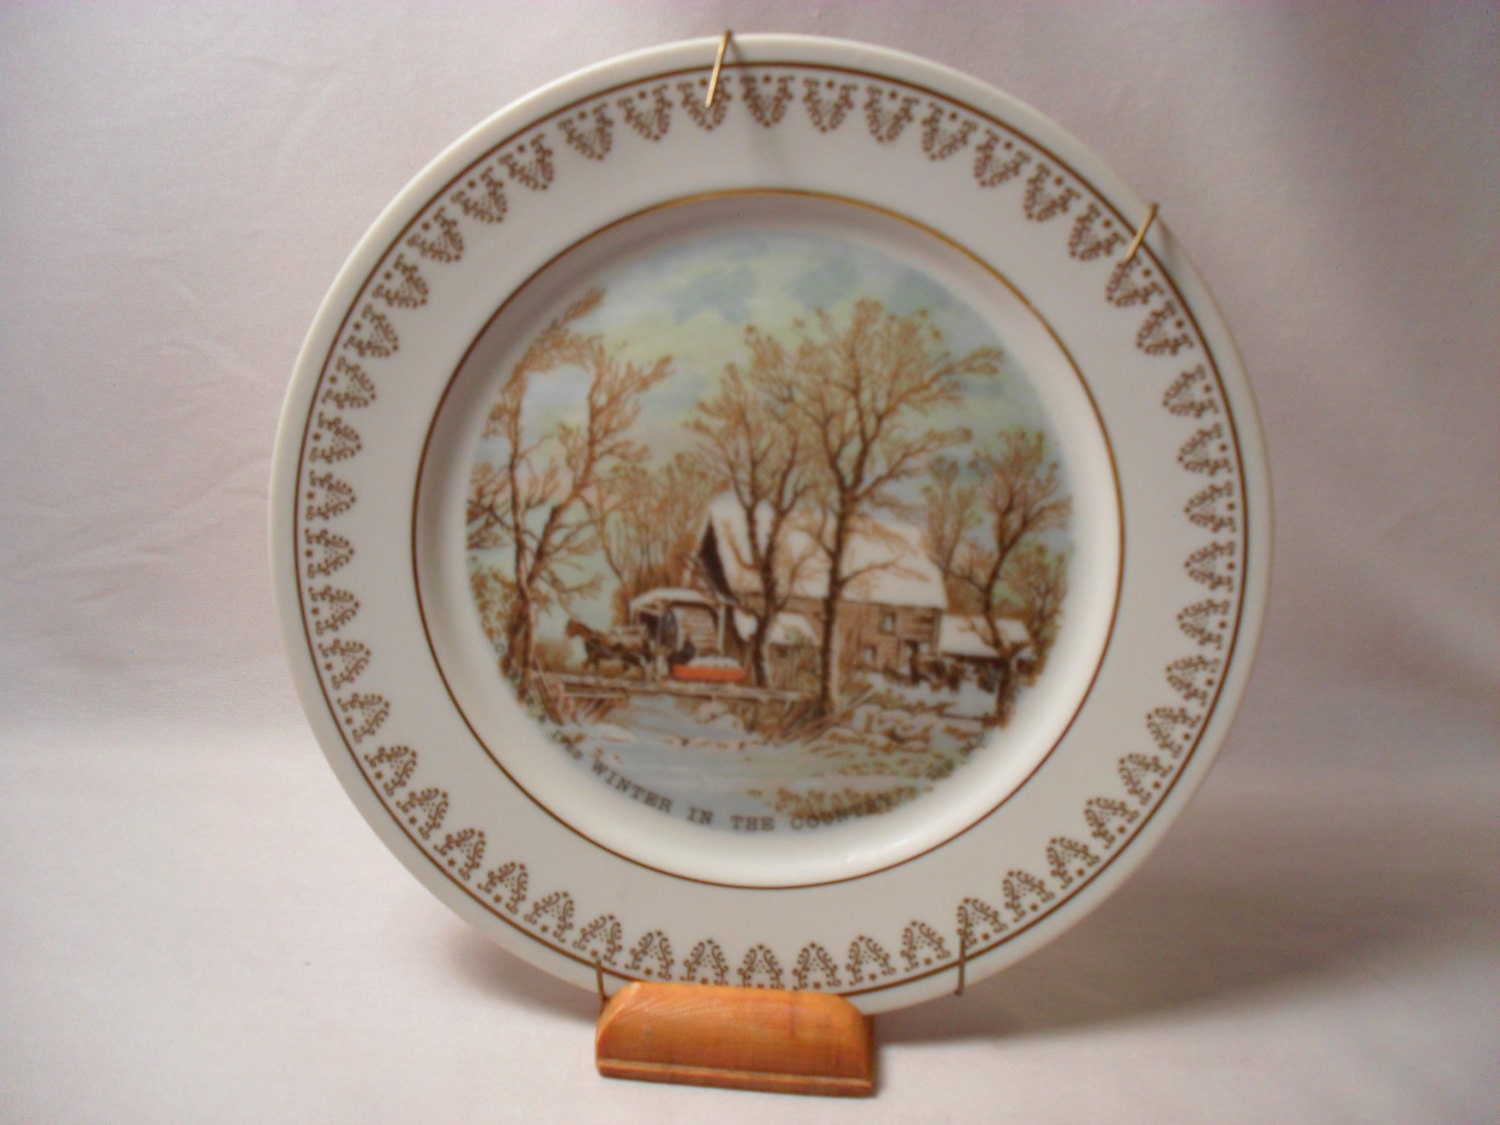 The Old Grist Mill Plate by Currier and Ives